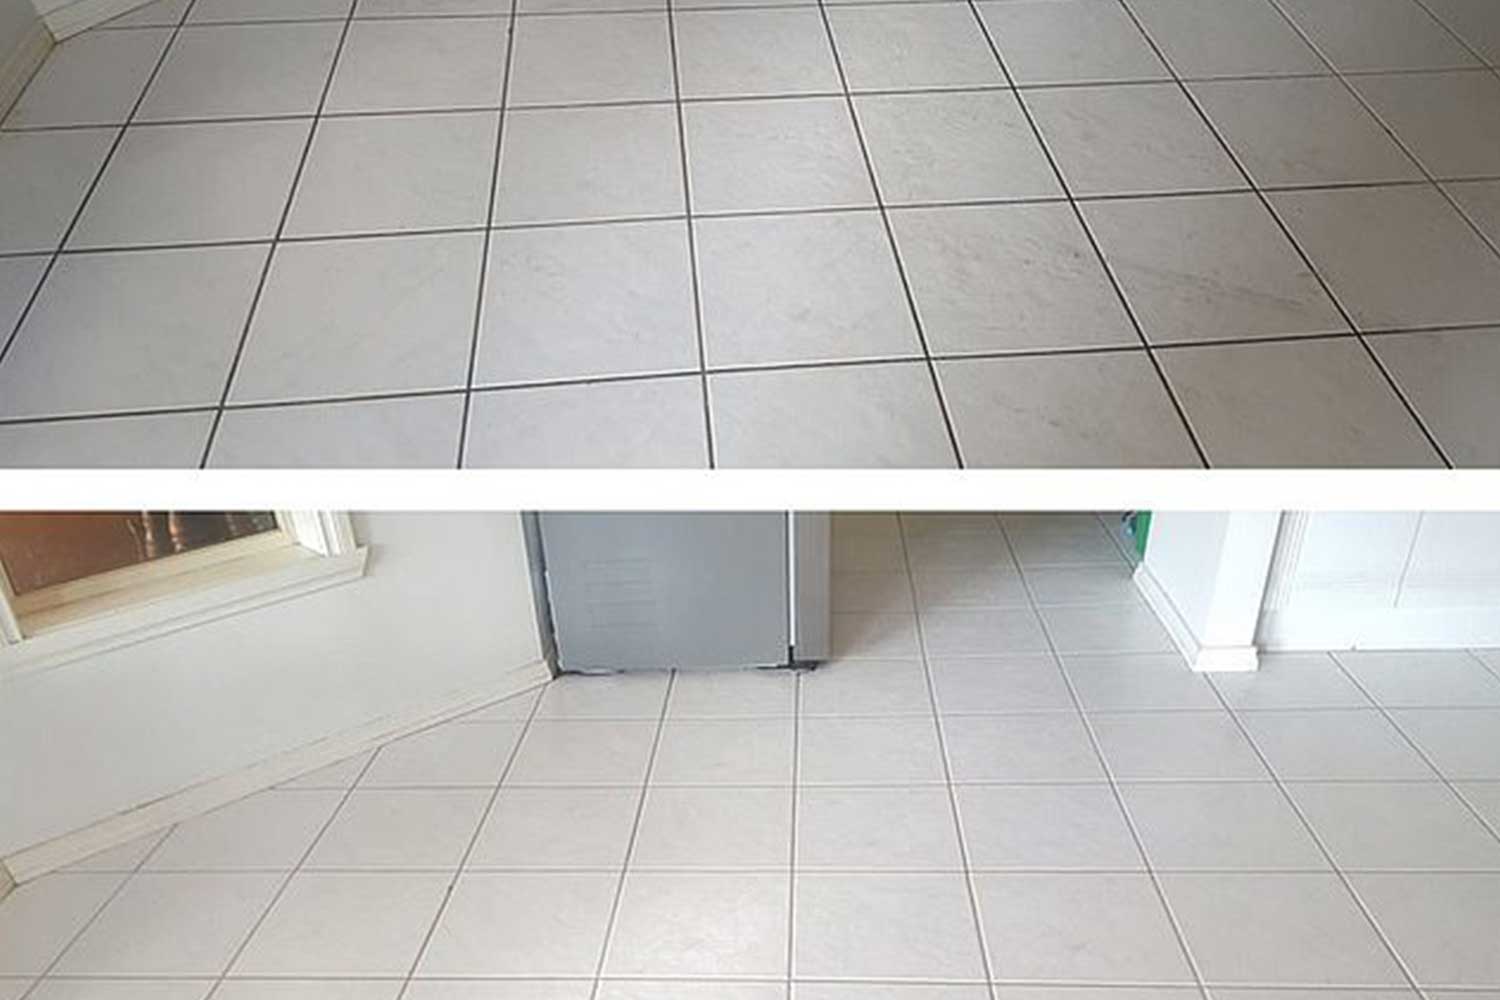 Professional cleaner reveals grout cleaning hack | Better Homes and Gardens